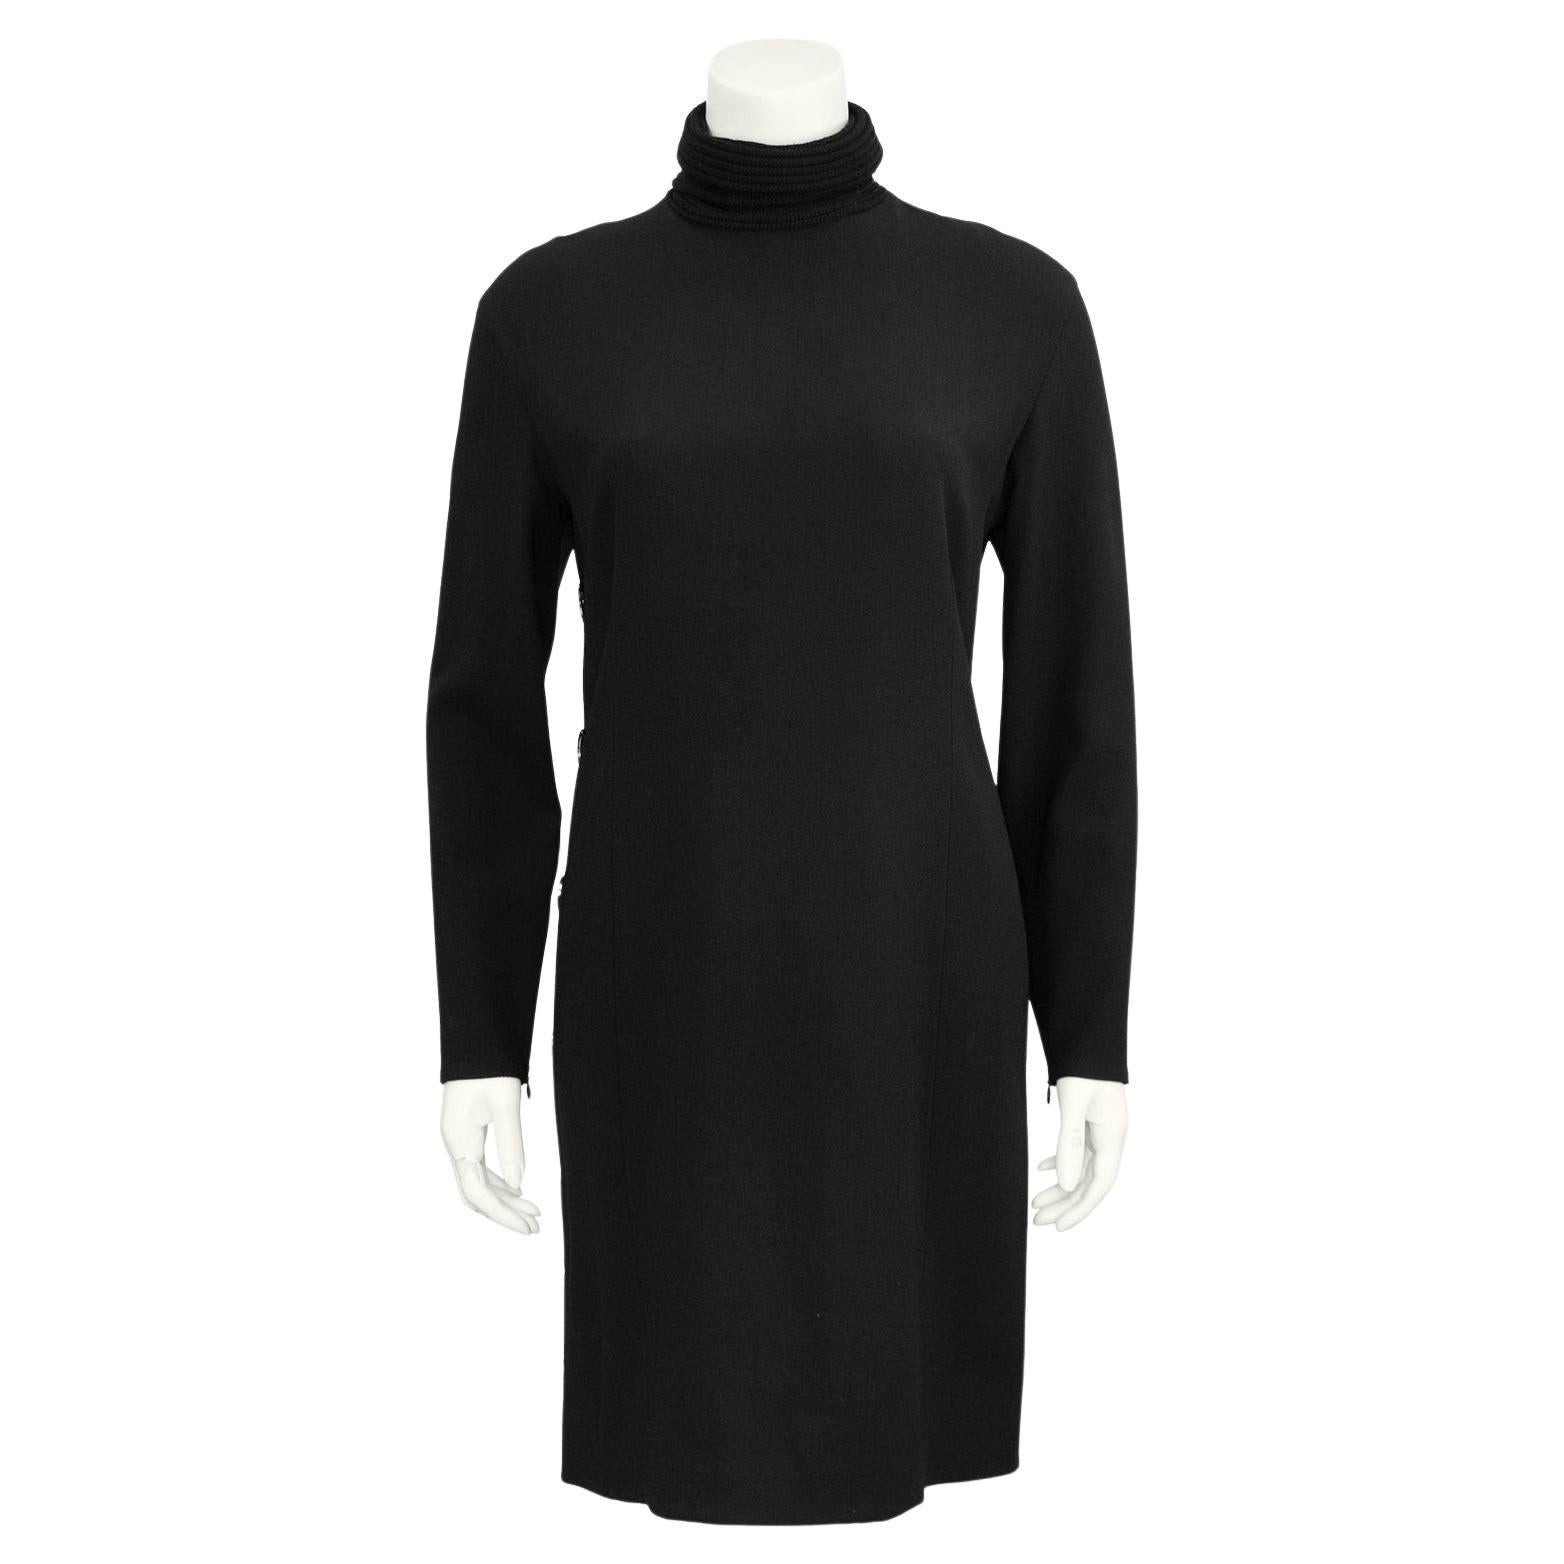 1990s Gianfranco Ferre Black Turtleneck Dress with Button Detail For Sale